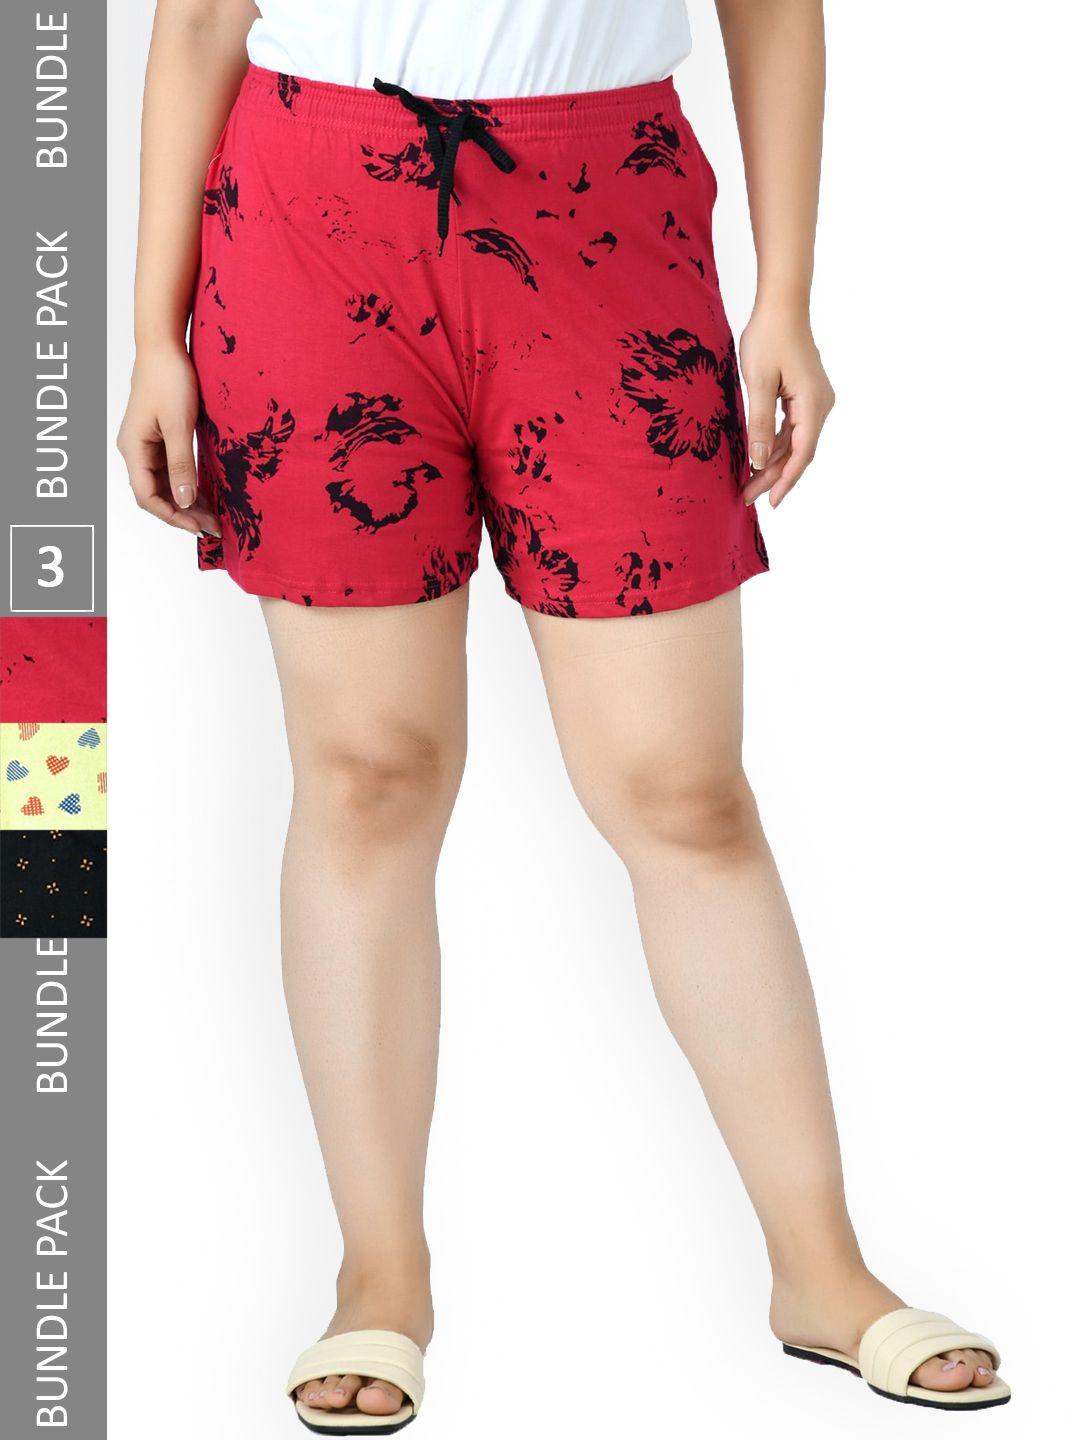 indiweaves-women-pack-of-3-high-rise-printed-pure-cotton-shorts